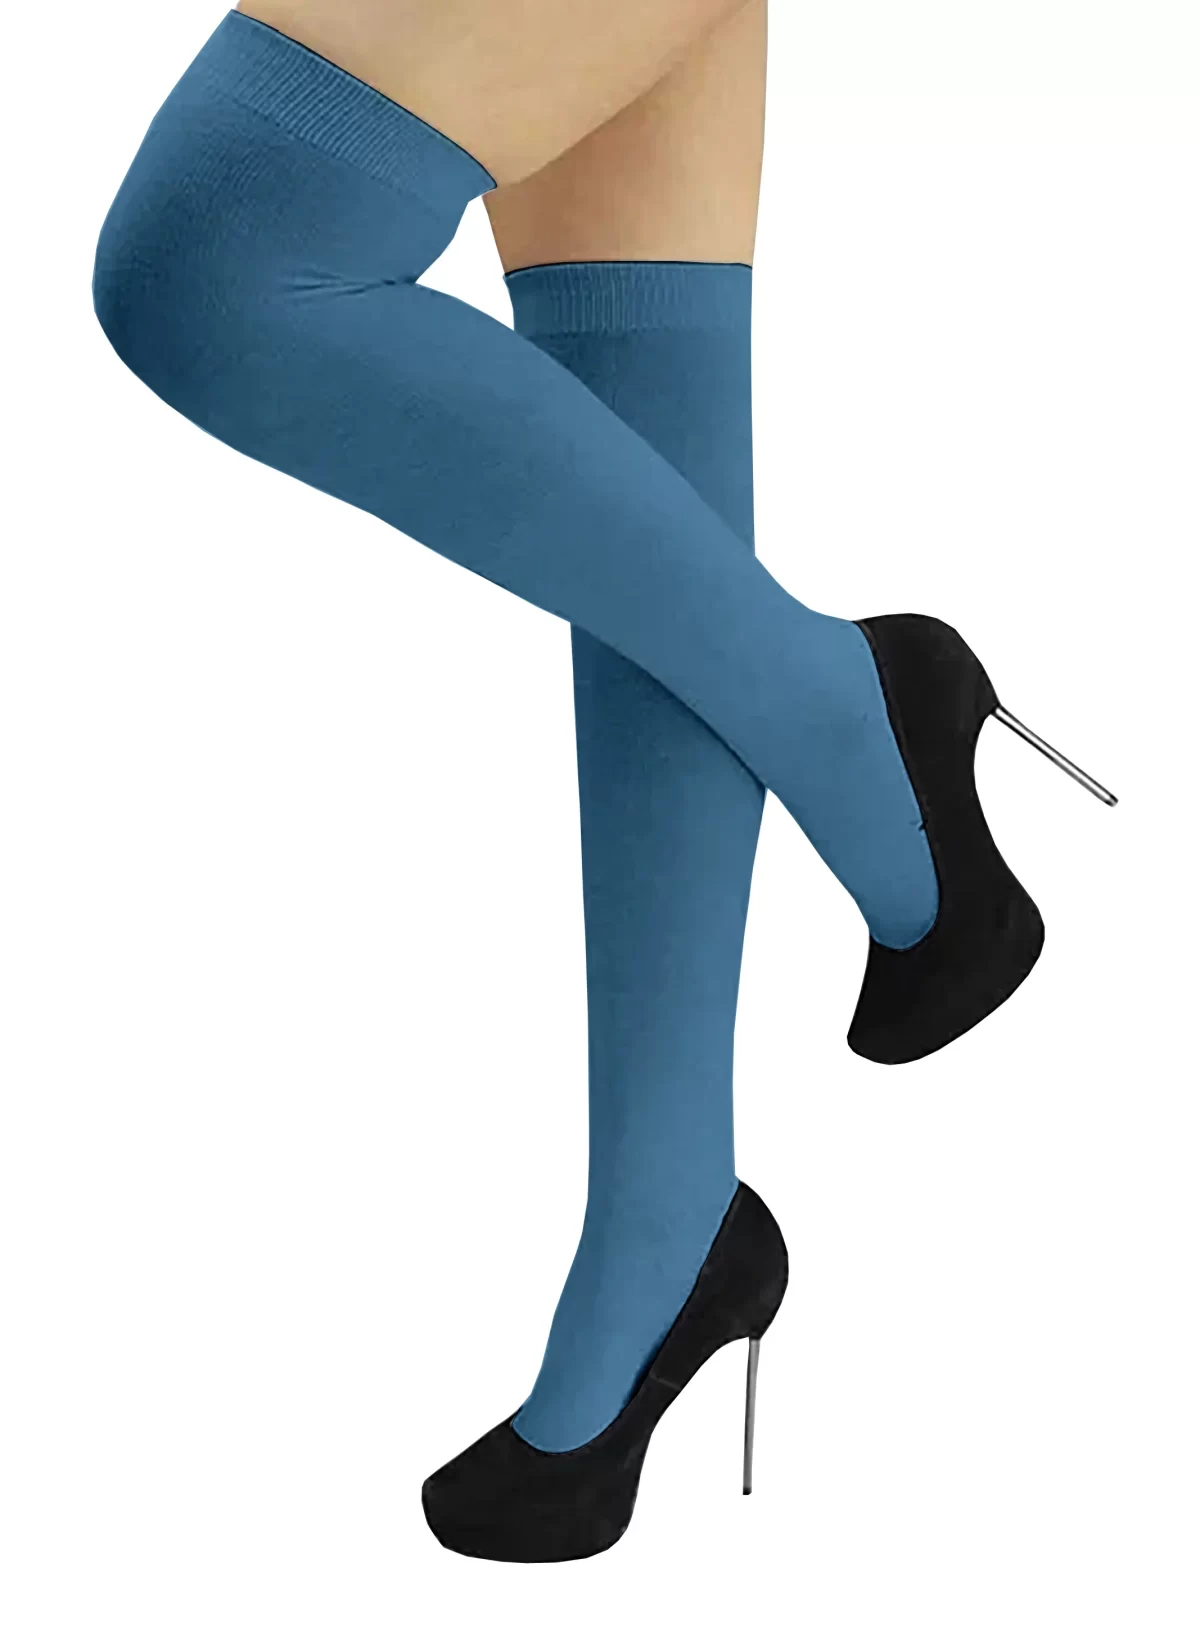 Steel Blue Girls and Women's Thigh High Stocking/Socks ( Free Size )3